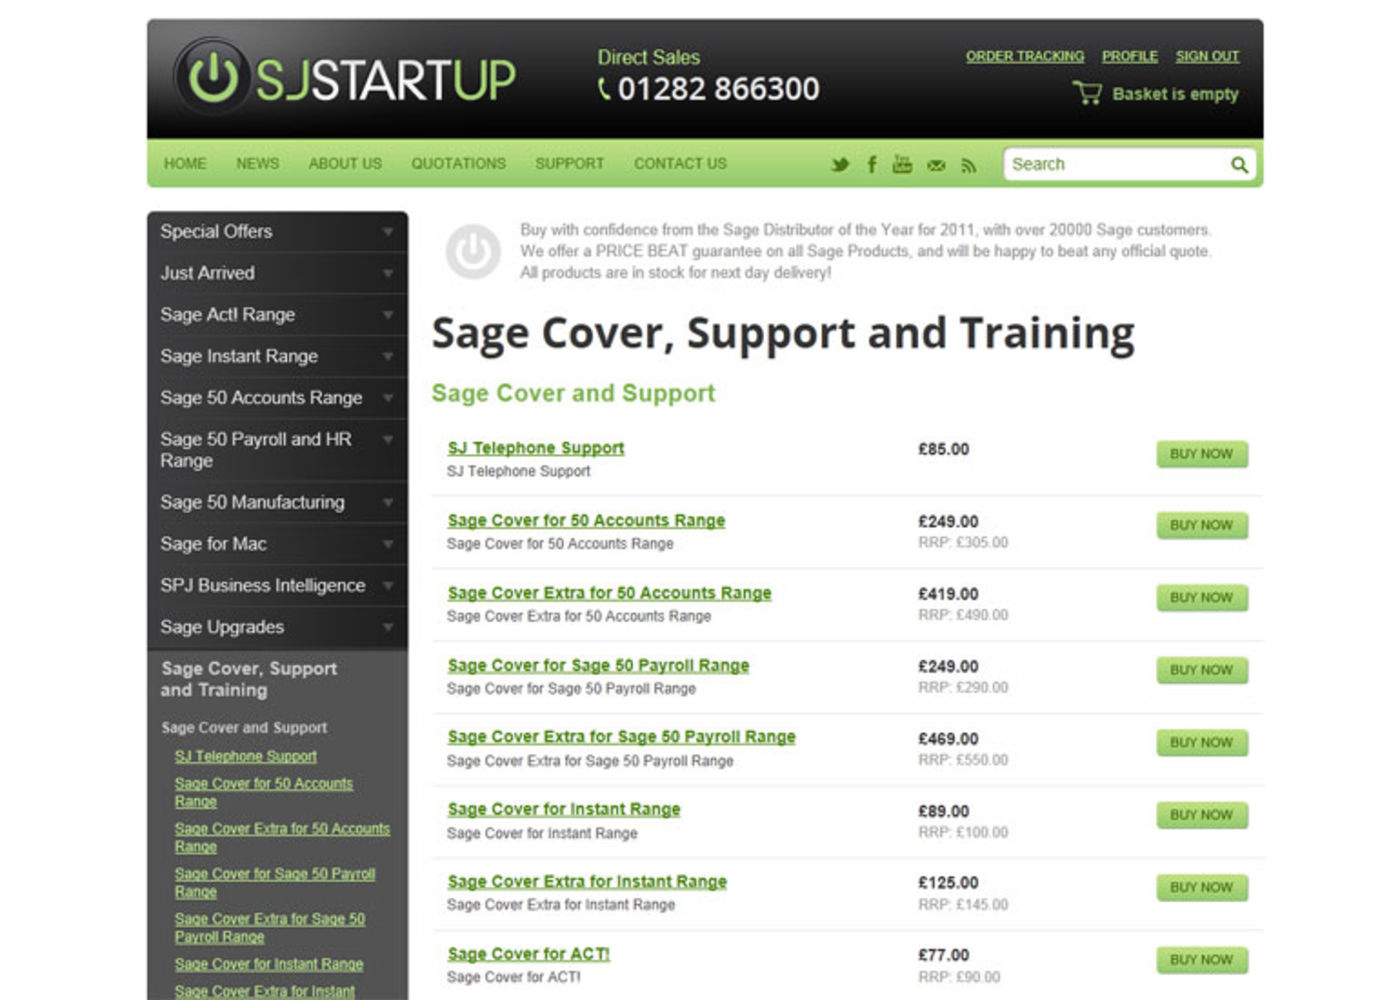 SJ Startup Page Products - SJ Startup